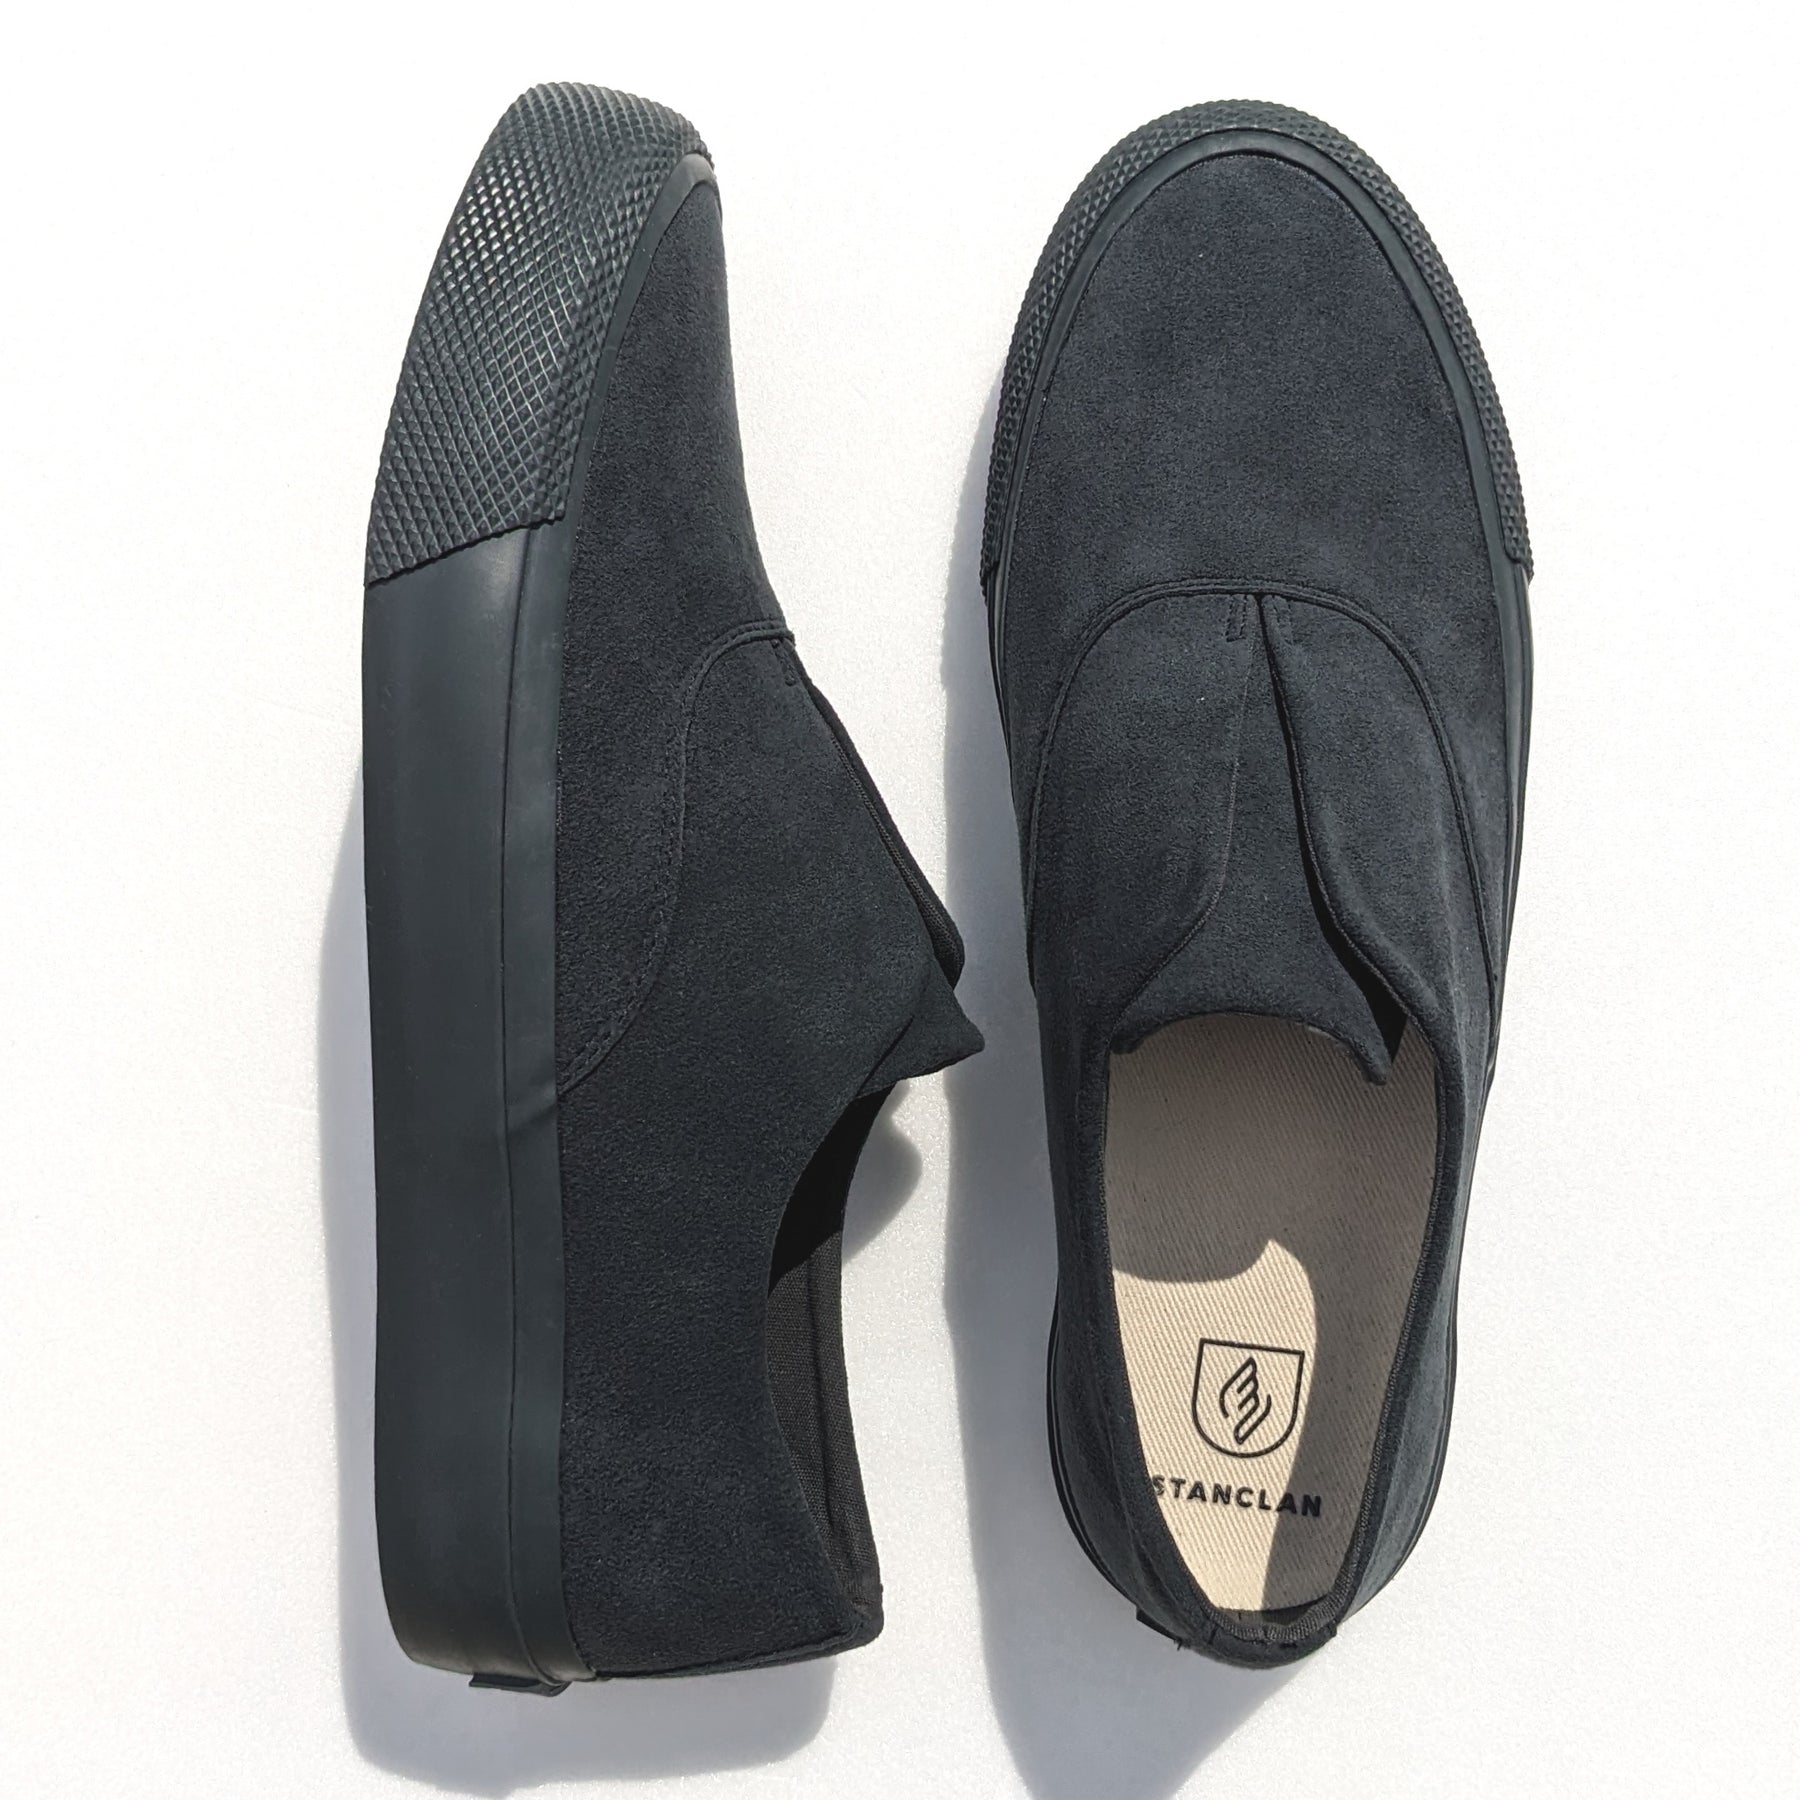 OXFORD Suede Charcoal Gray Mono